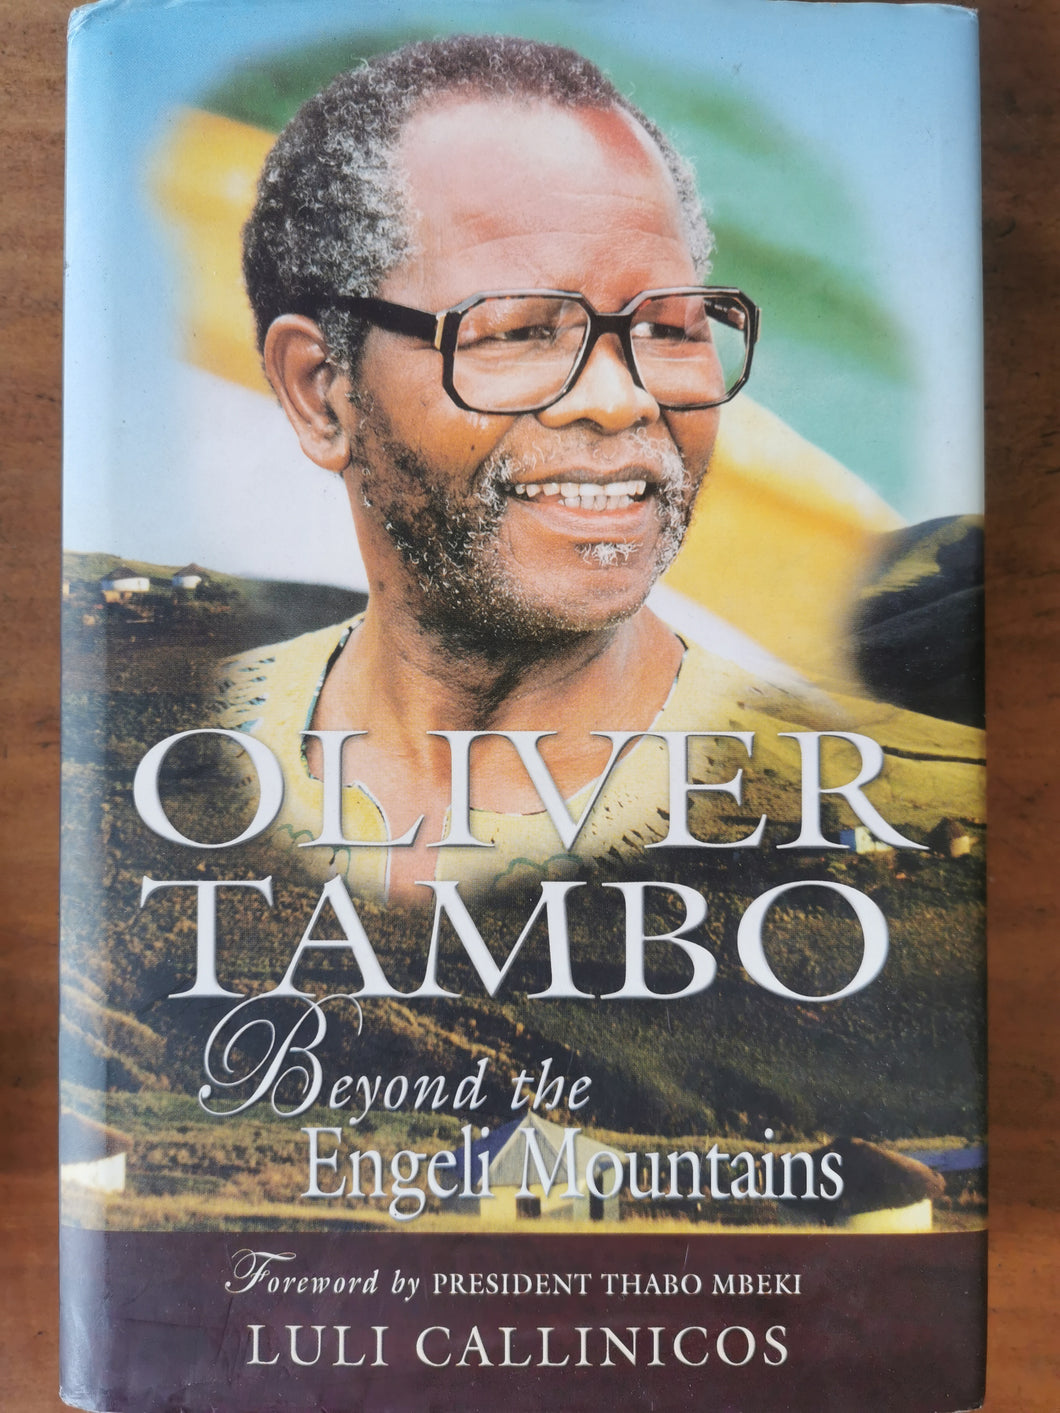 Oliver Tambo - Beyond the Engeli Mountains by Luli Callinicos